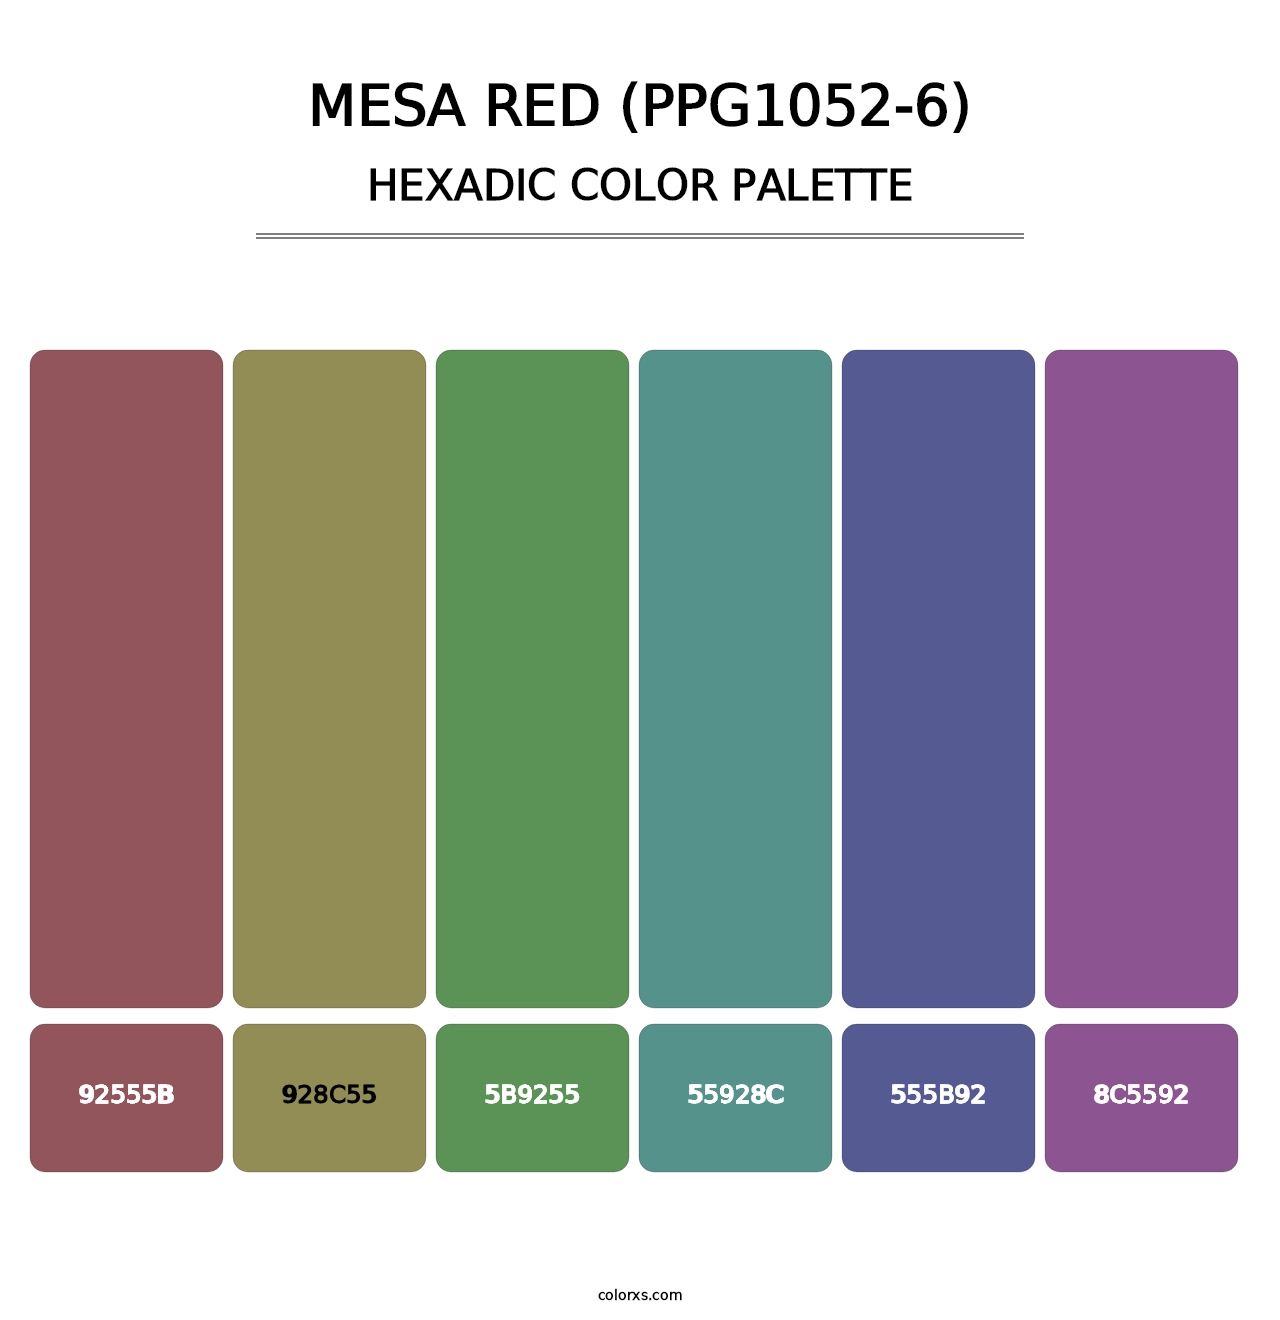 Mesa Red (PPG1052-6) - Hexadic Color Palette